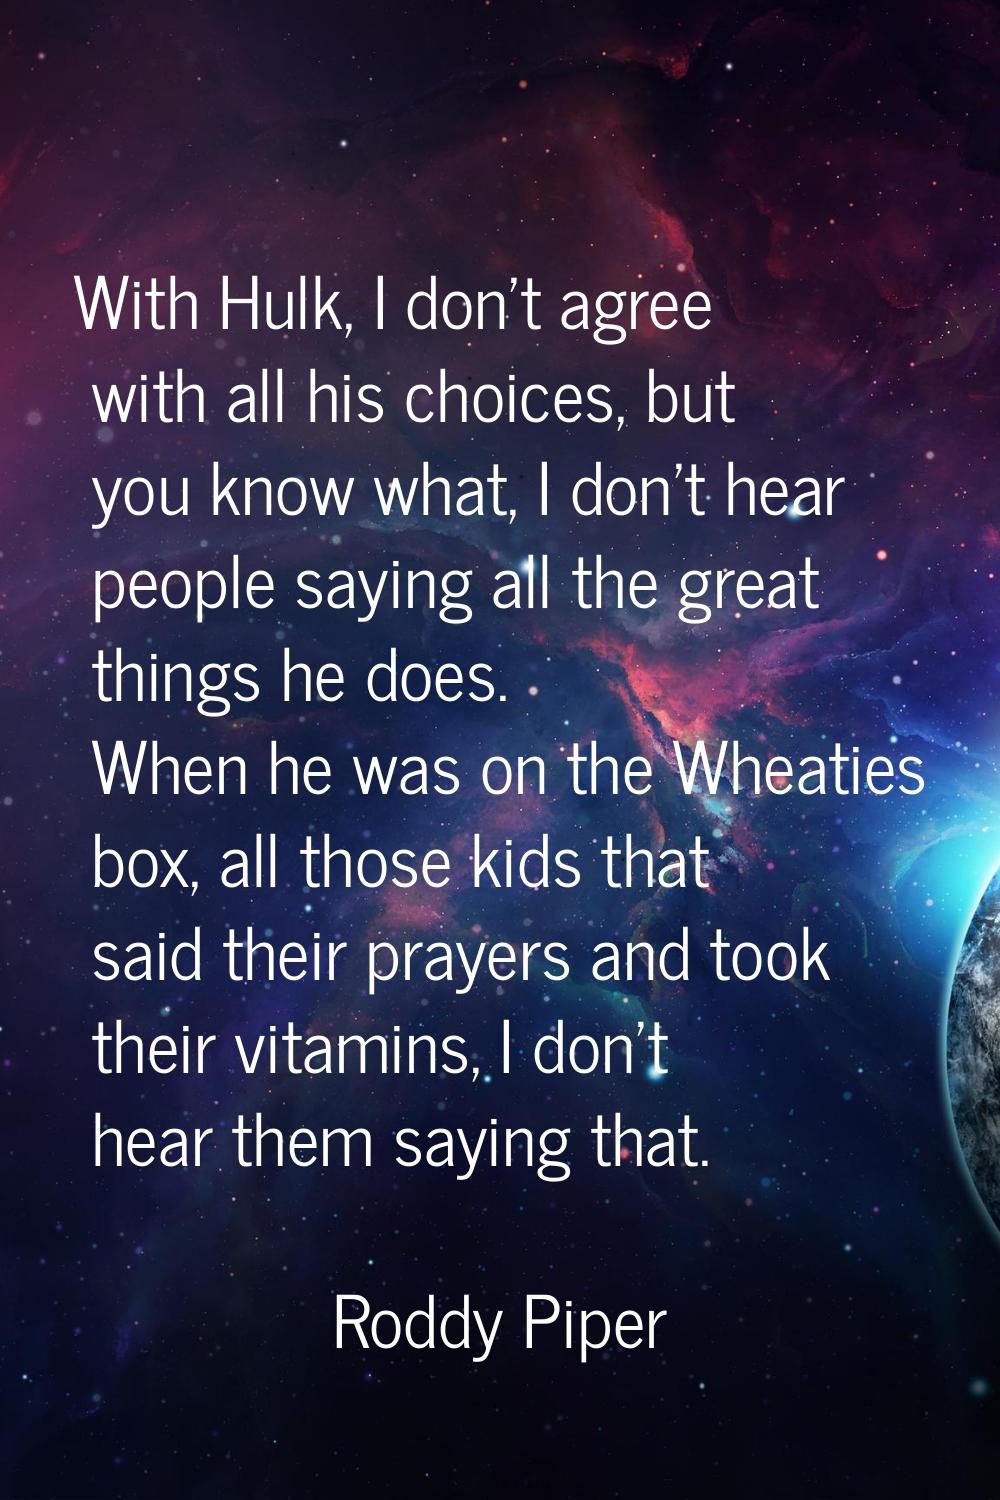 With Hulk, I don't agree with all his choices, but you know what, I don't hear people saying all th